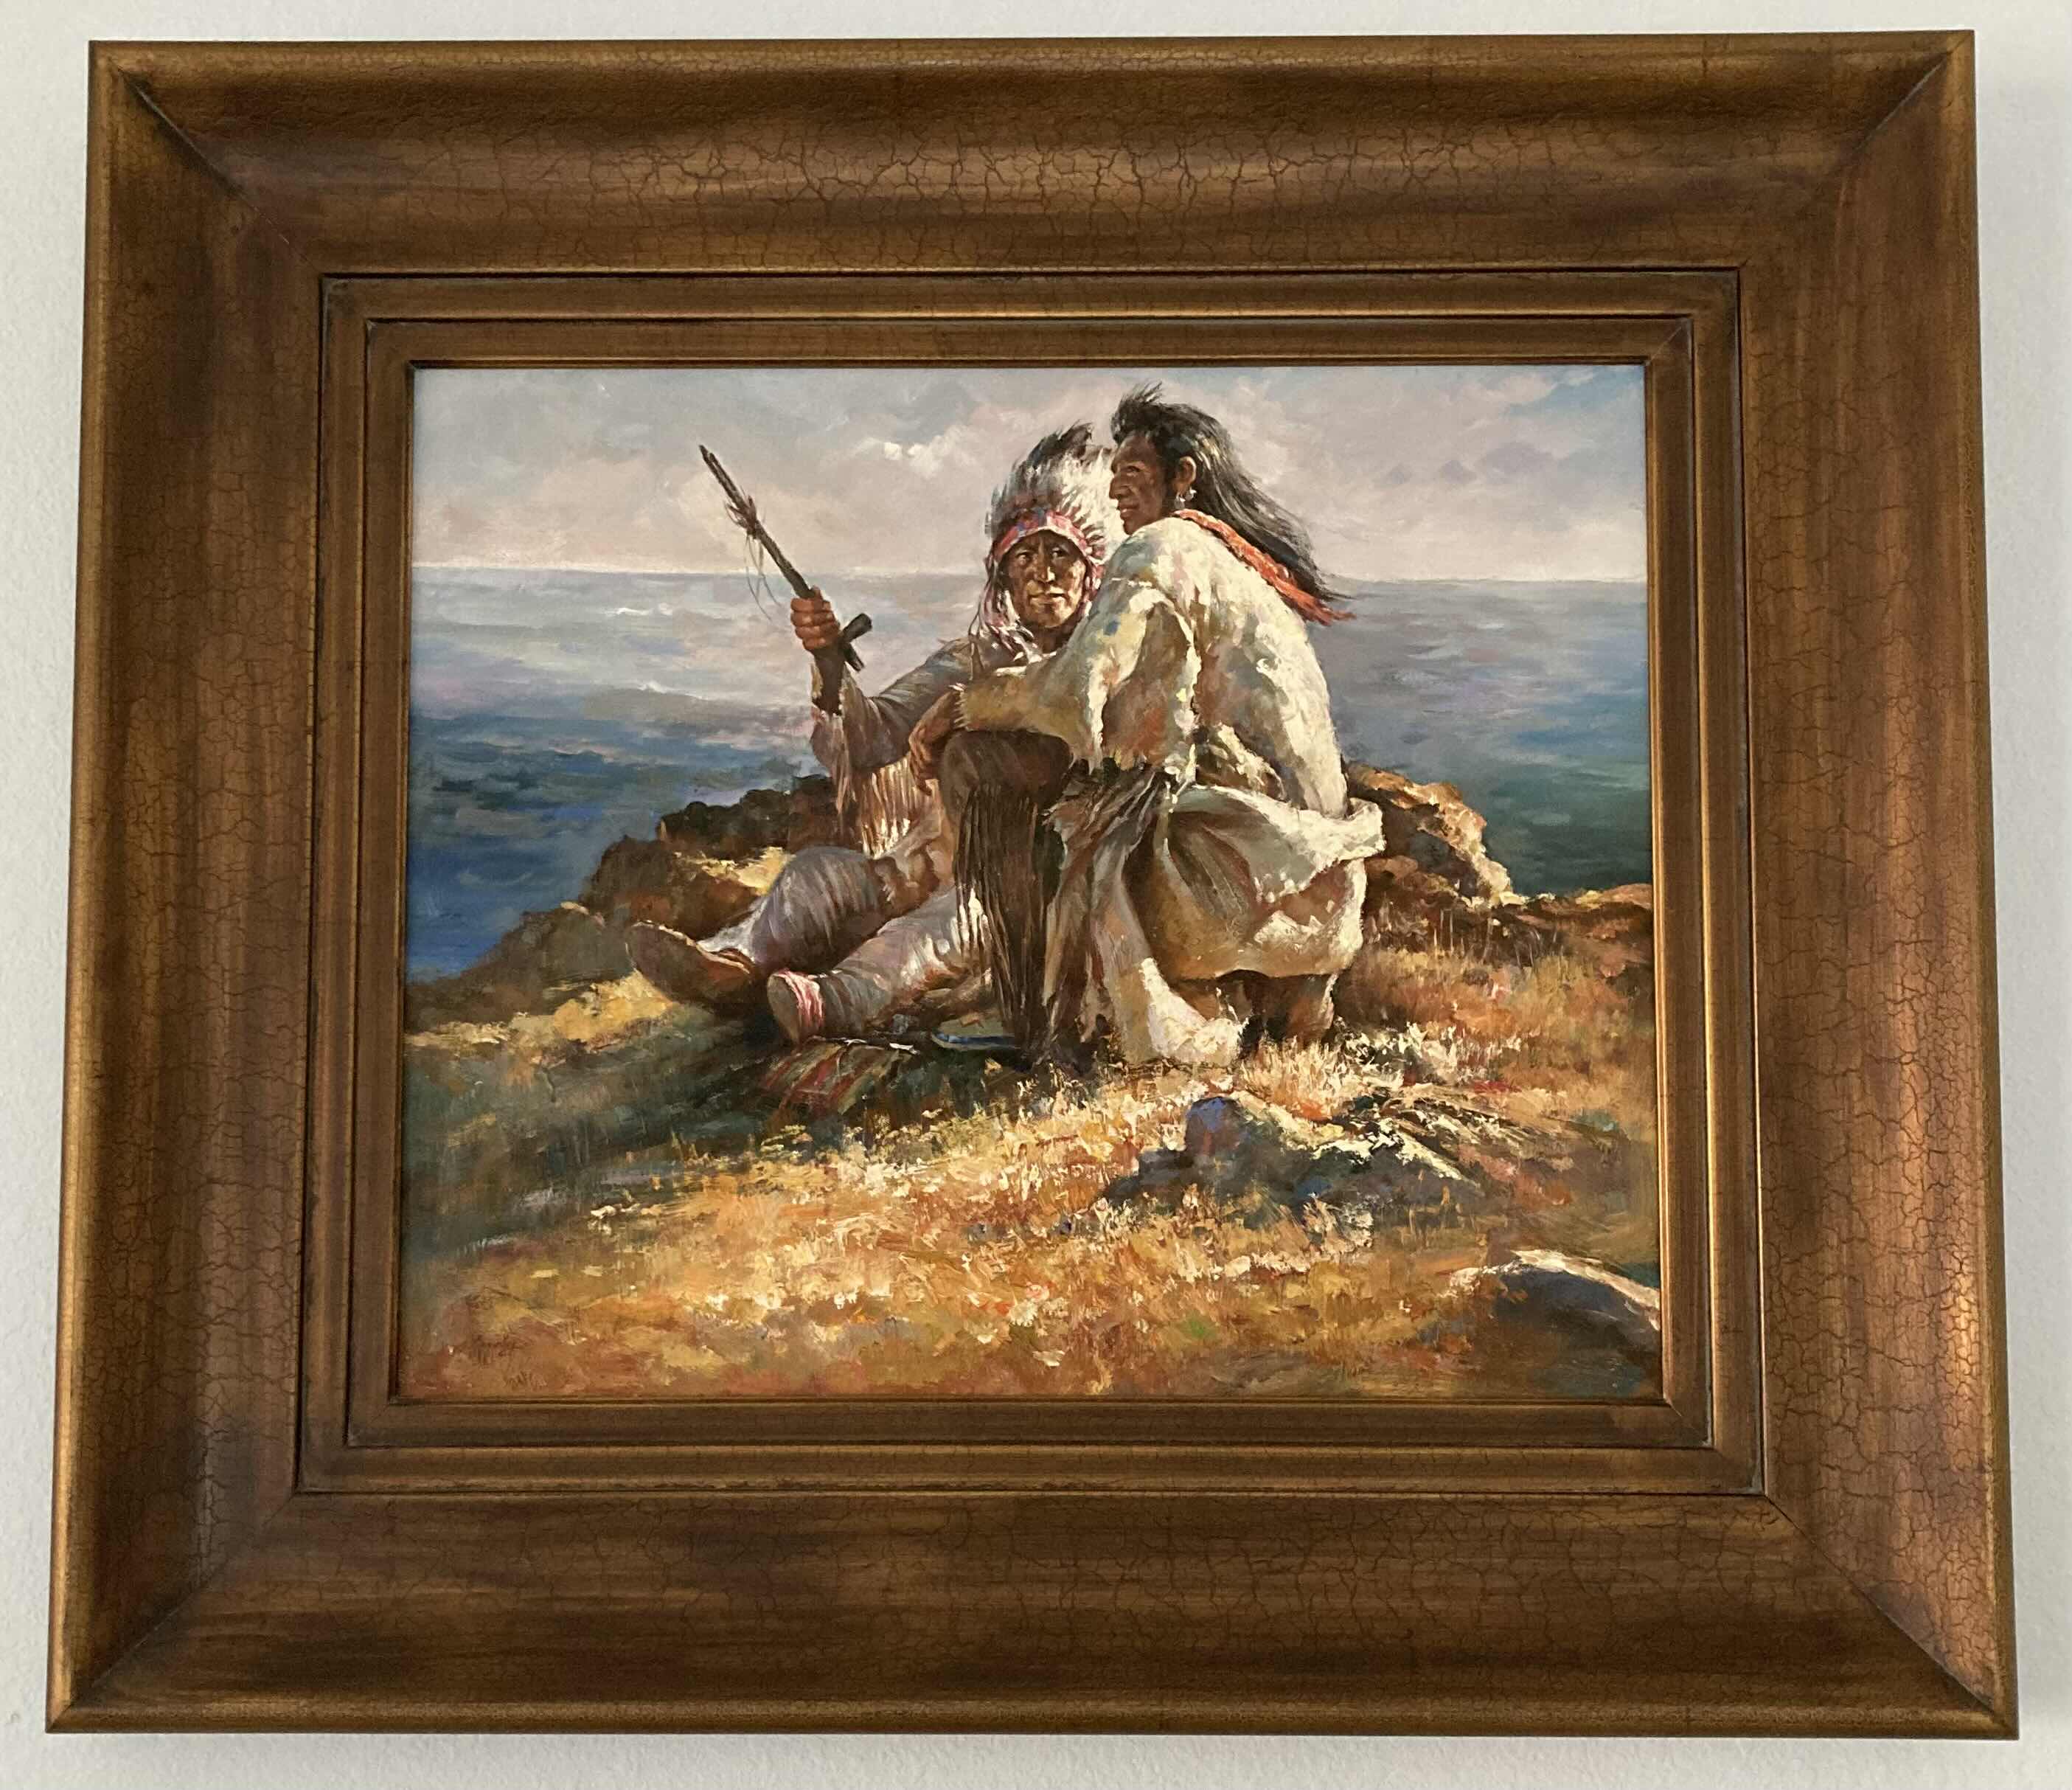 Photo 1 of NATIVE AMERICAN BROTHERS OIL PAINTING FRAMED ARTWORK SIGNED BY ARTIST 35” X 31”